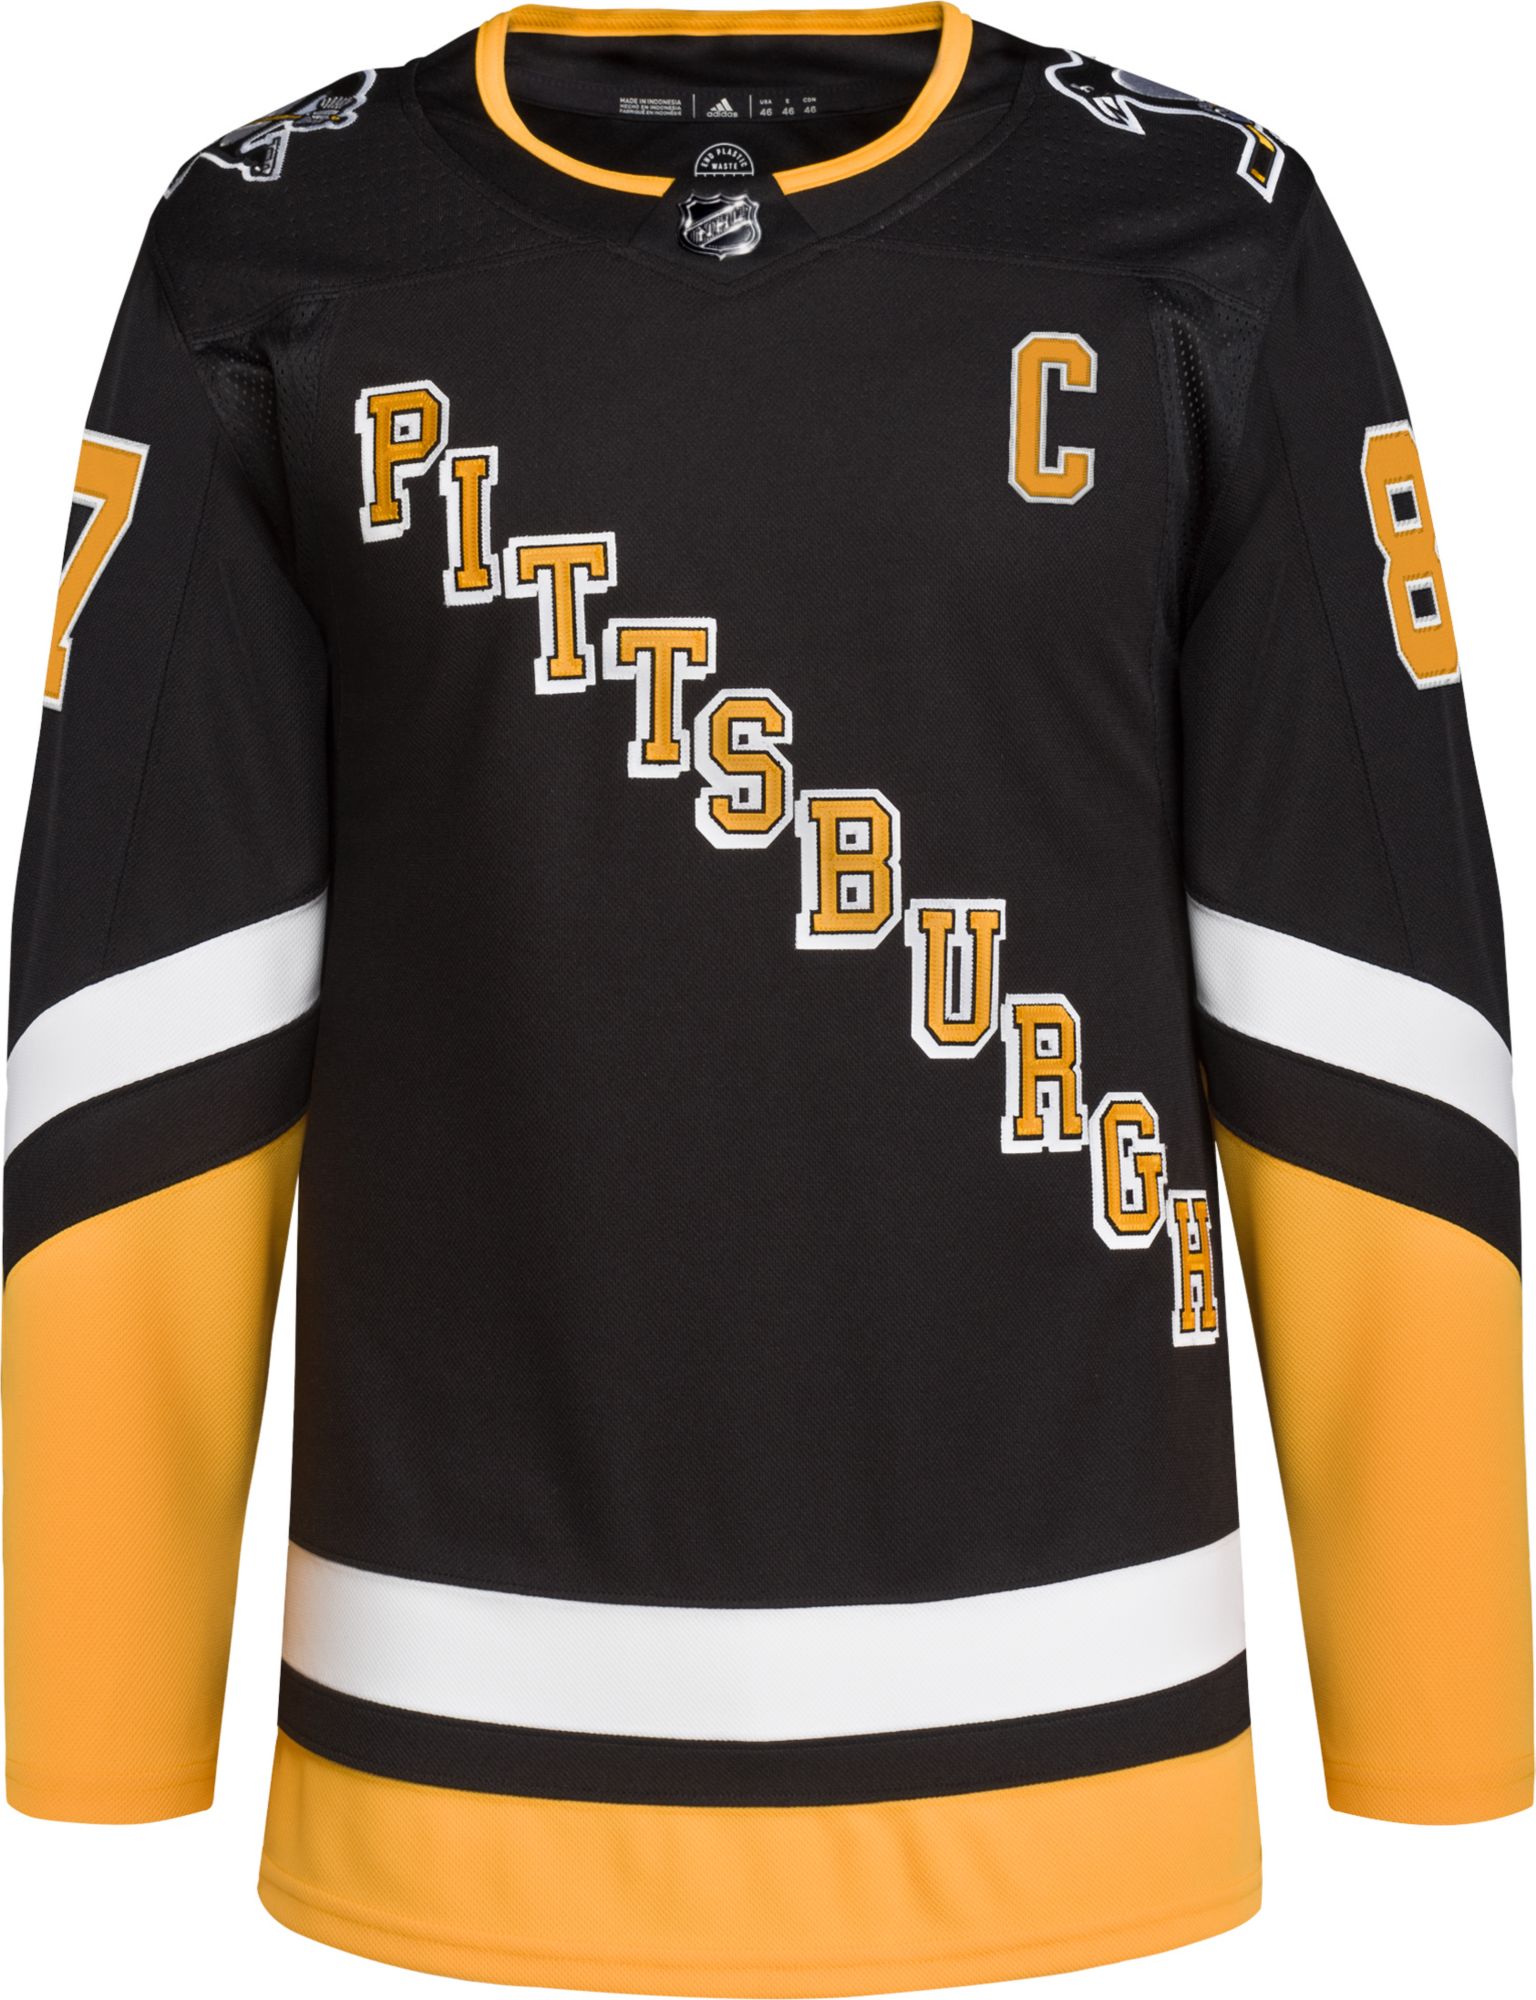 Adidas Pittsburgh Penguins No87 Sidney Crosby Black 1917-2017 100th Anniversary Stitched NHL Jersey